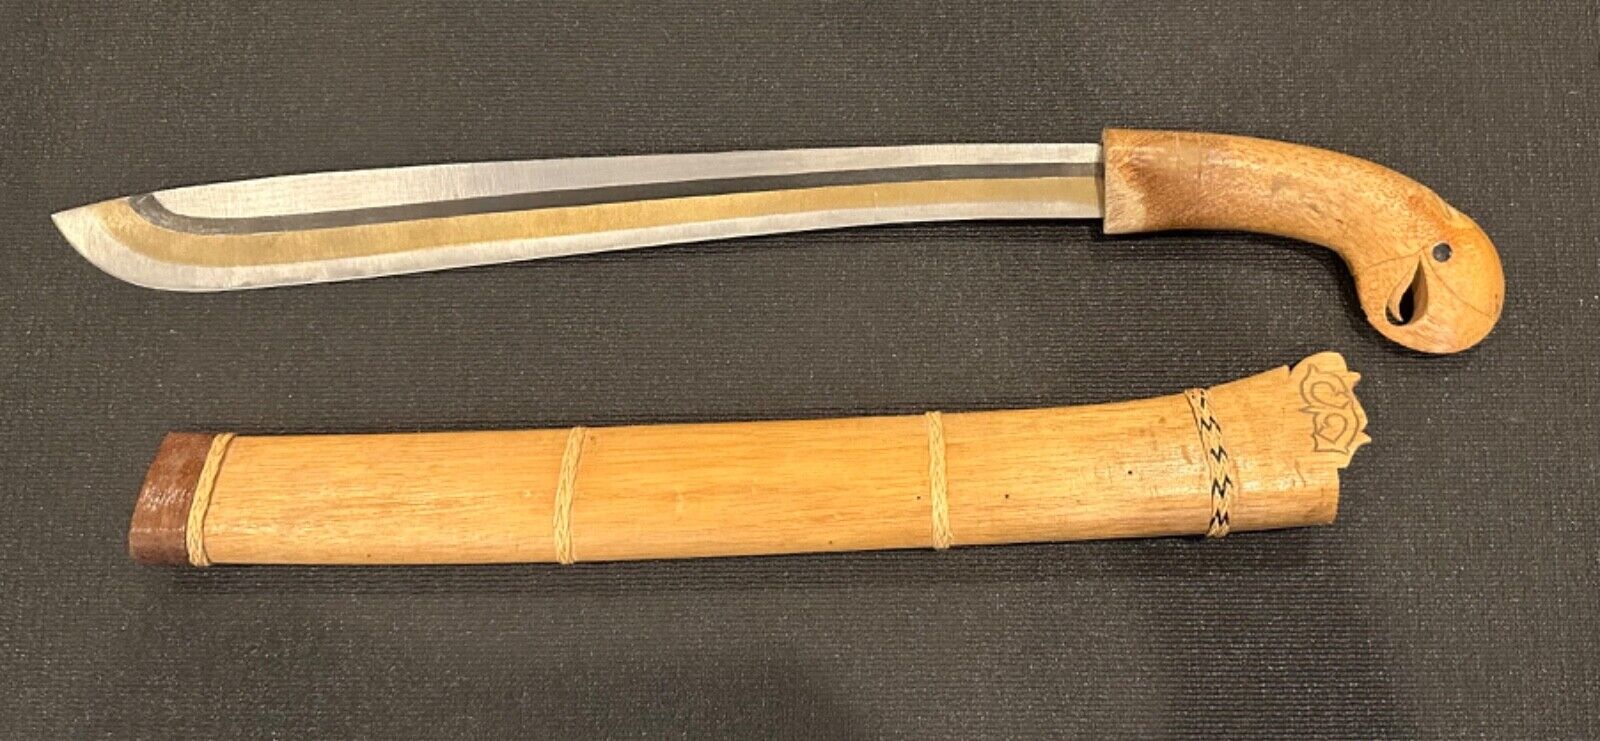 Indonesian Sword, bird handle, approximately 22 inches long